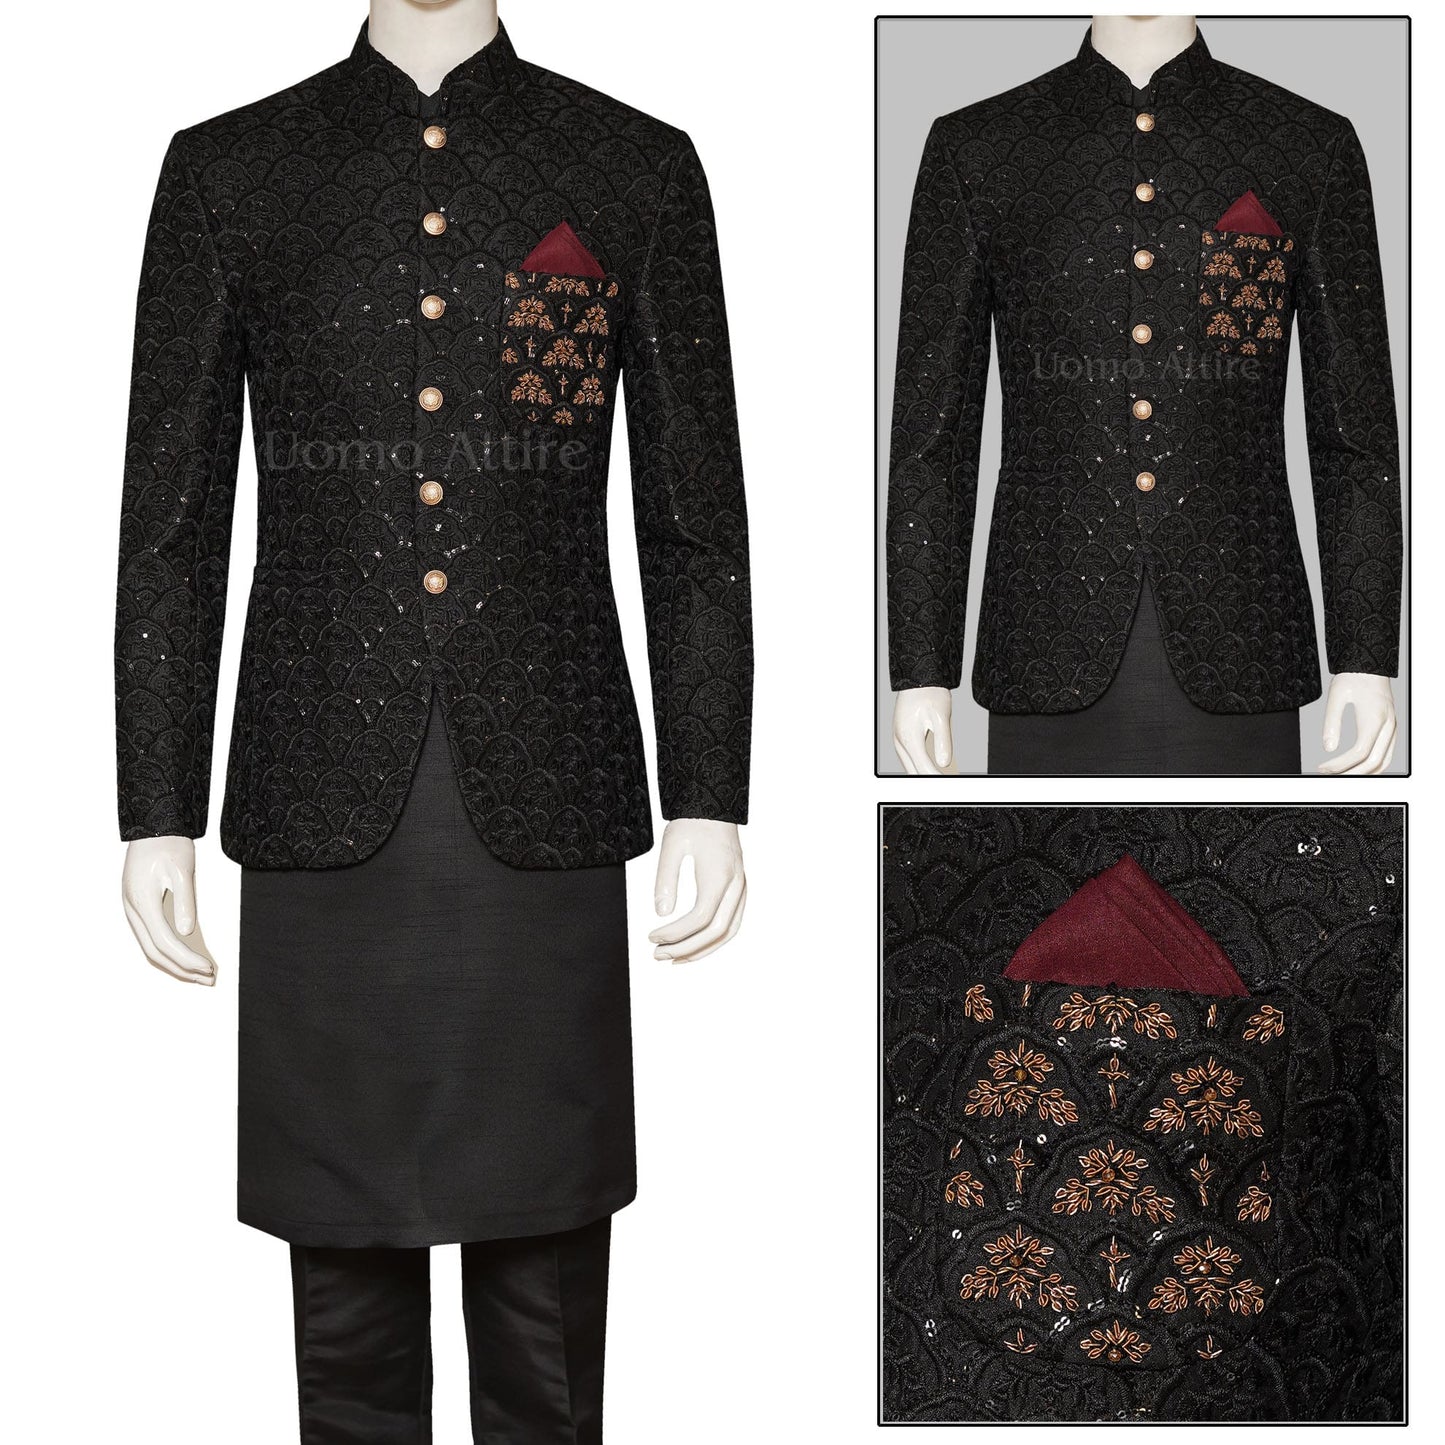 Jet Black Fully Embroidered Prince Coat For Special Events